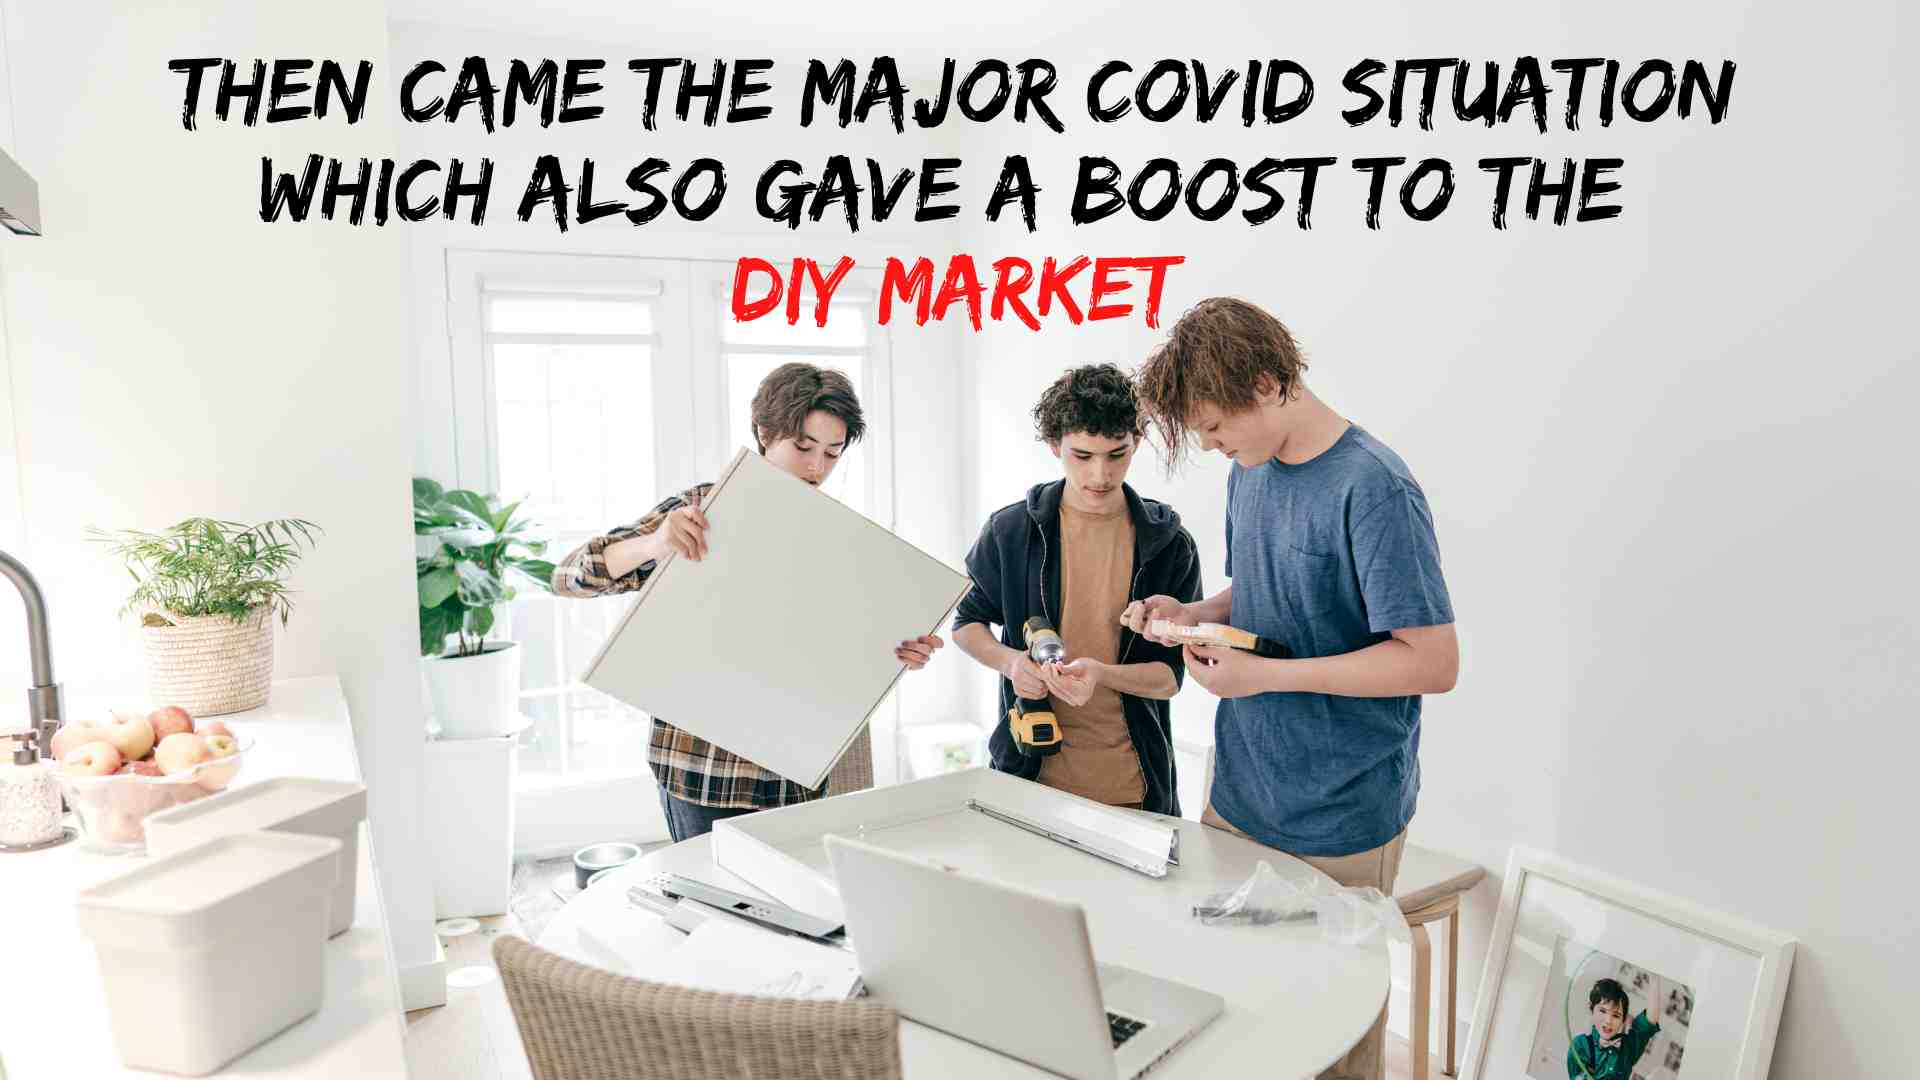 Then came the major COVID situation which also gave a boost to the DIY market